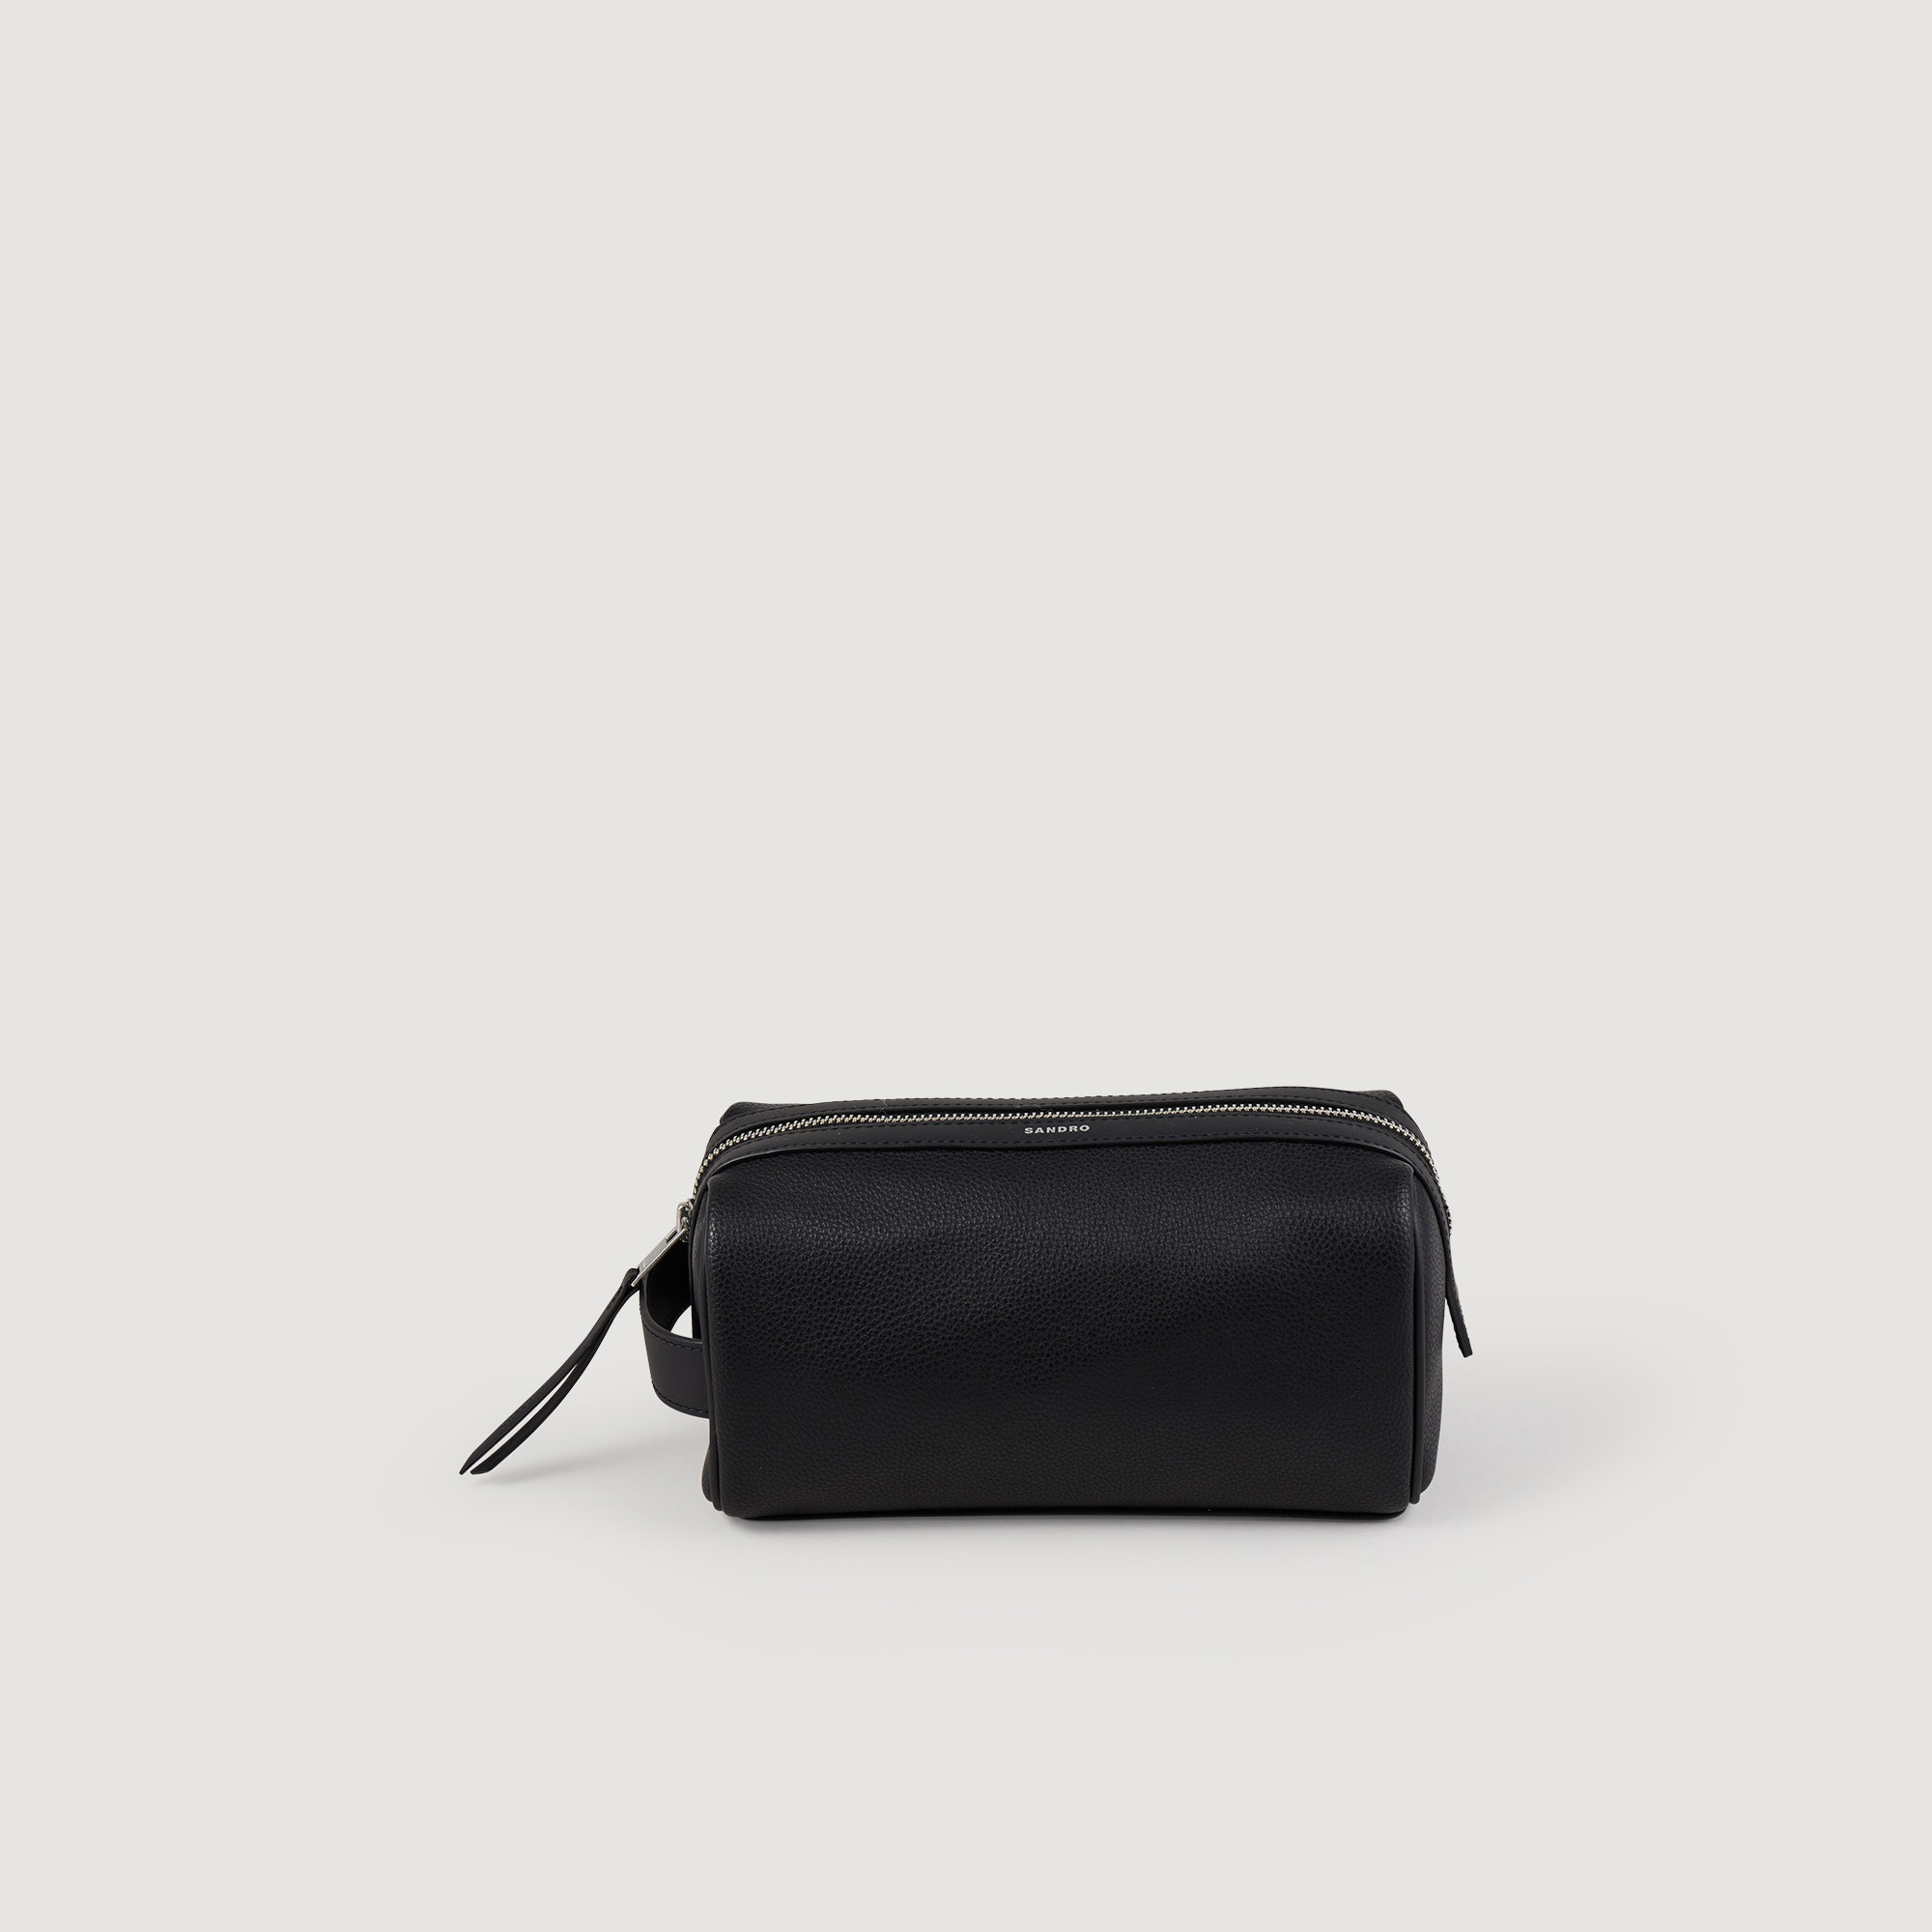 Sandro polyester Lining: Sandro men's toiletry bag â€¢ Zipped toiletry bag â€¢ Dimensions: 22 x 11 cm This item's main material is at least 50% recycled